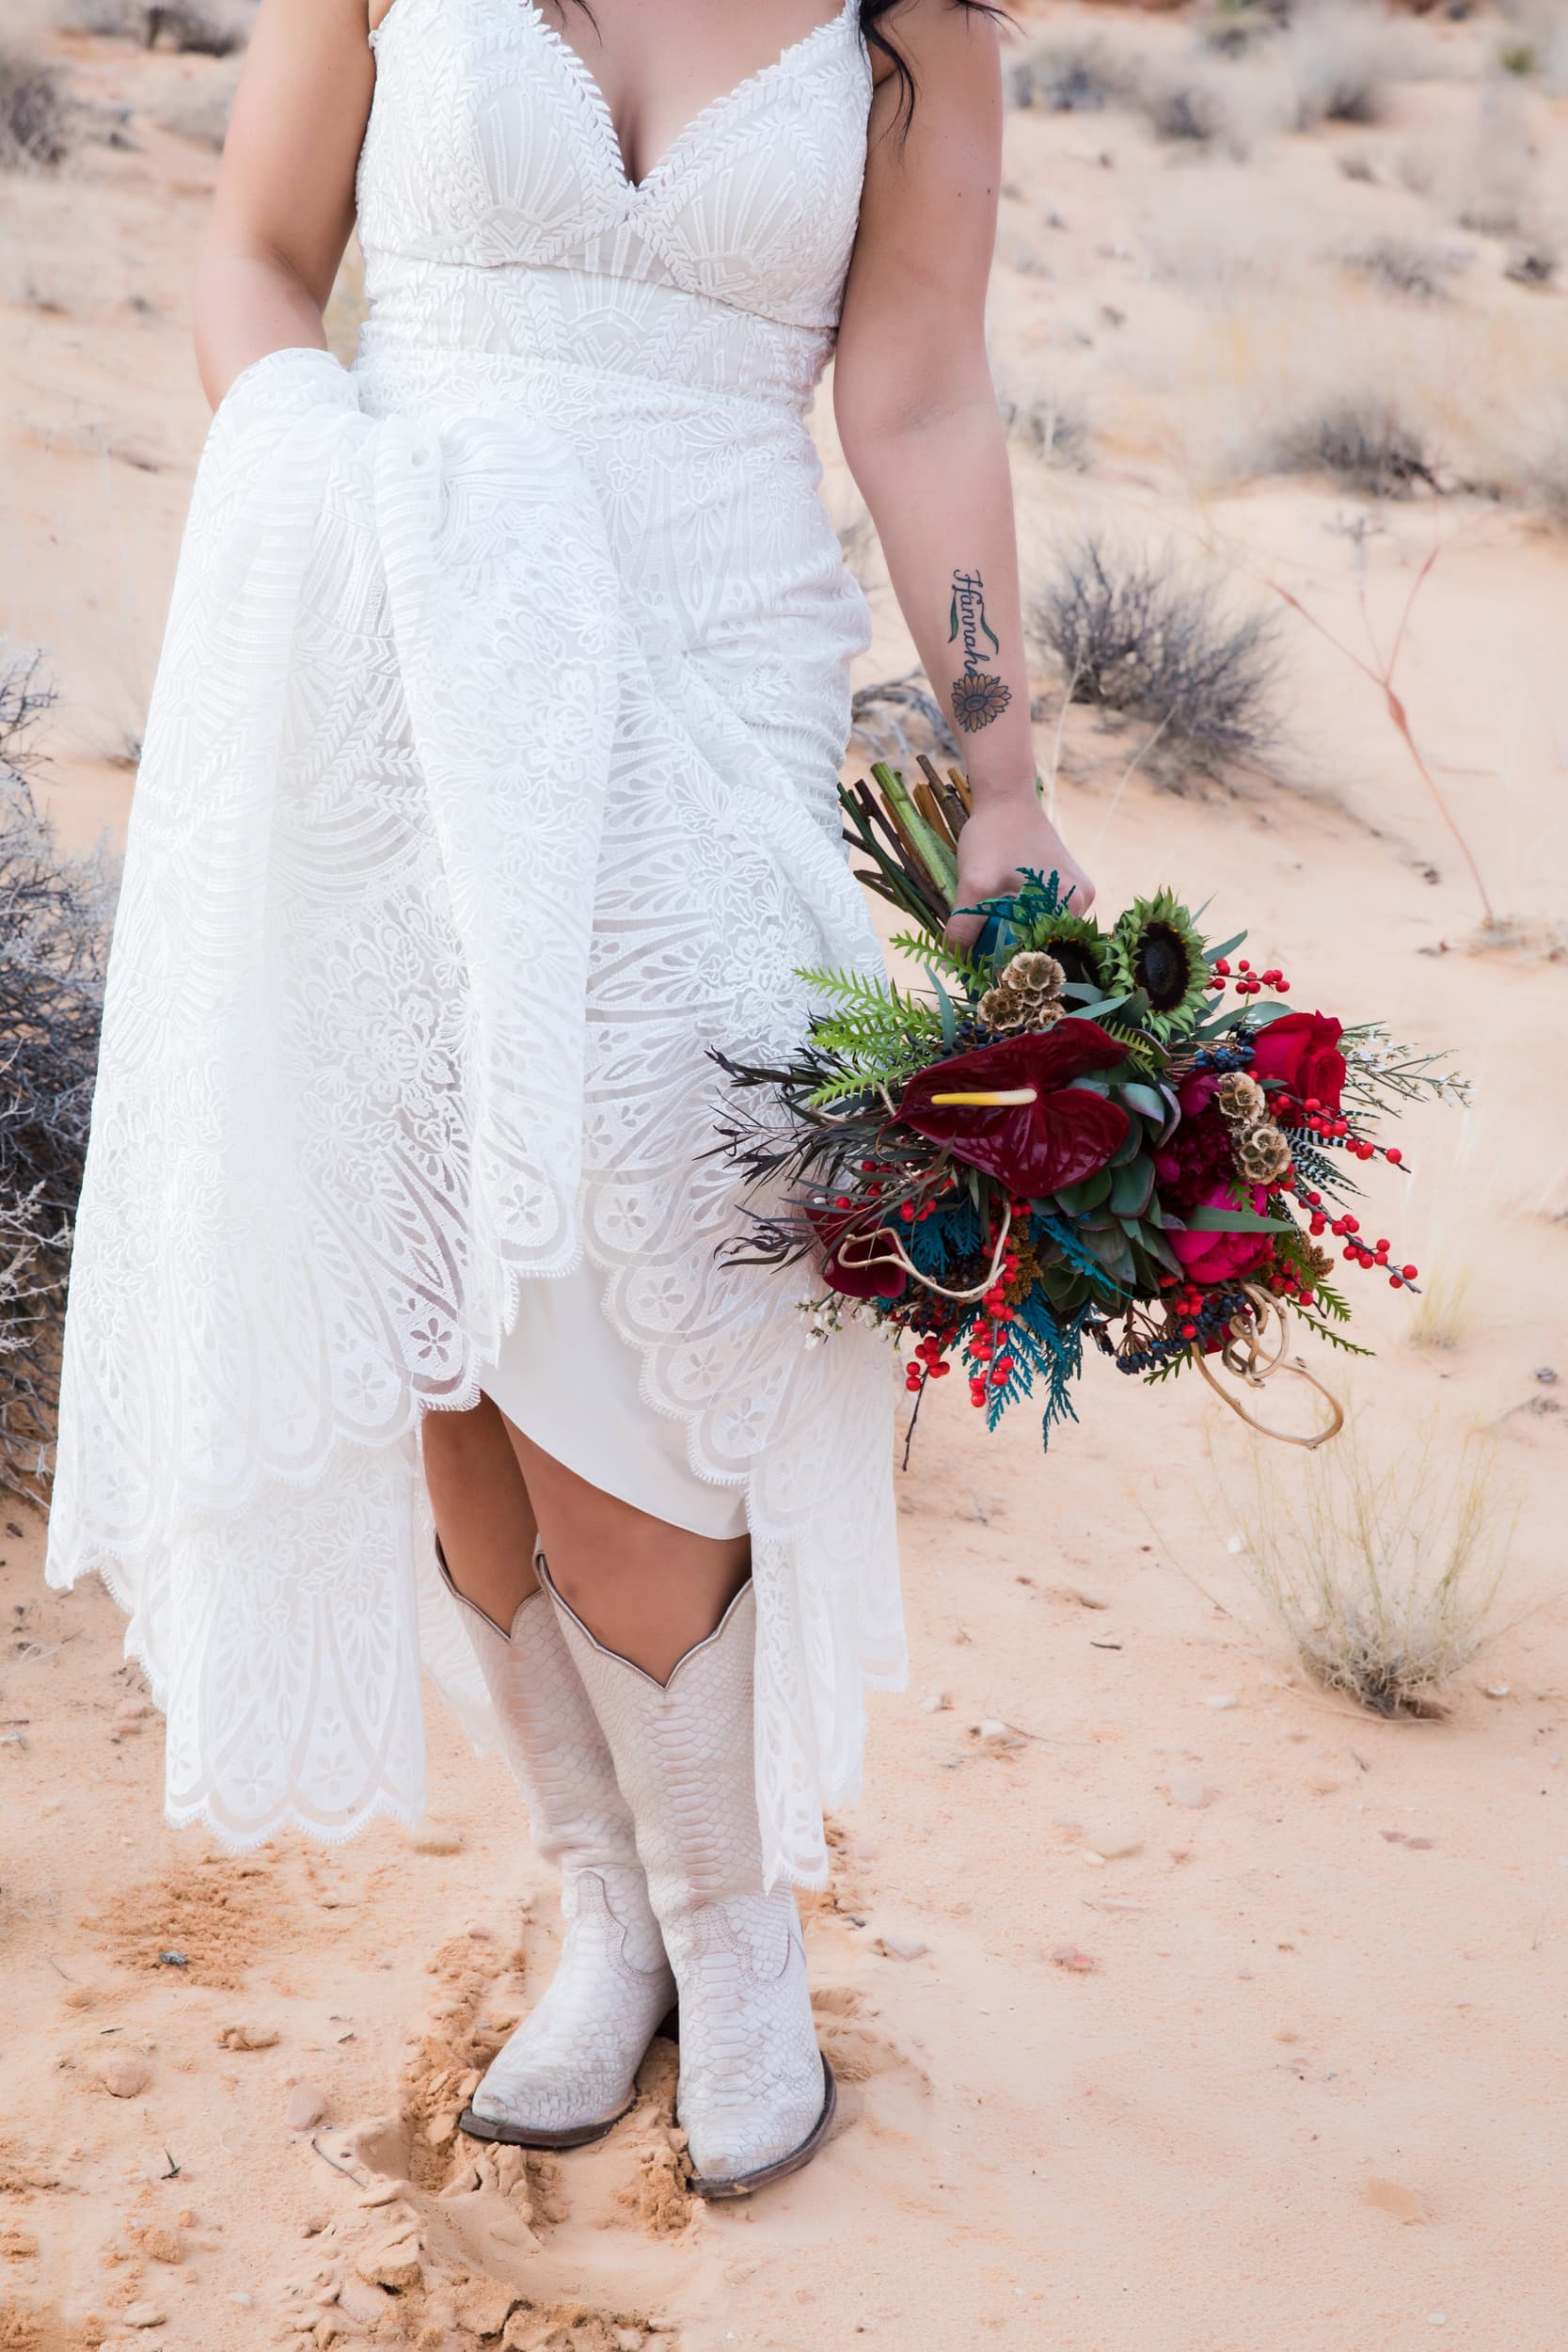 Woman in white wedding dress and white western boots holding a wedding bouquet.